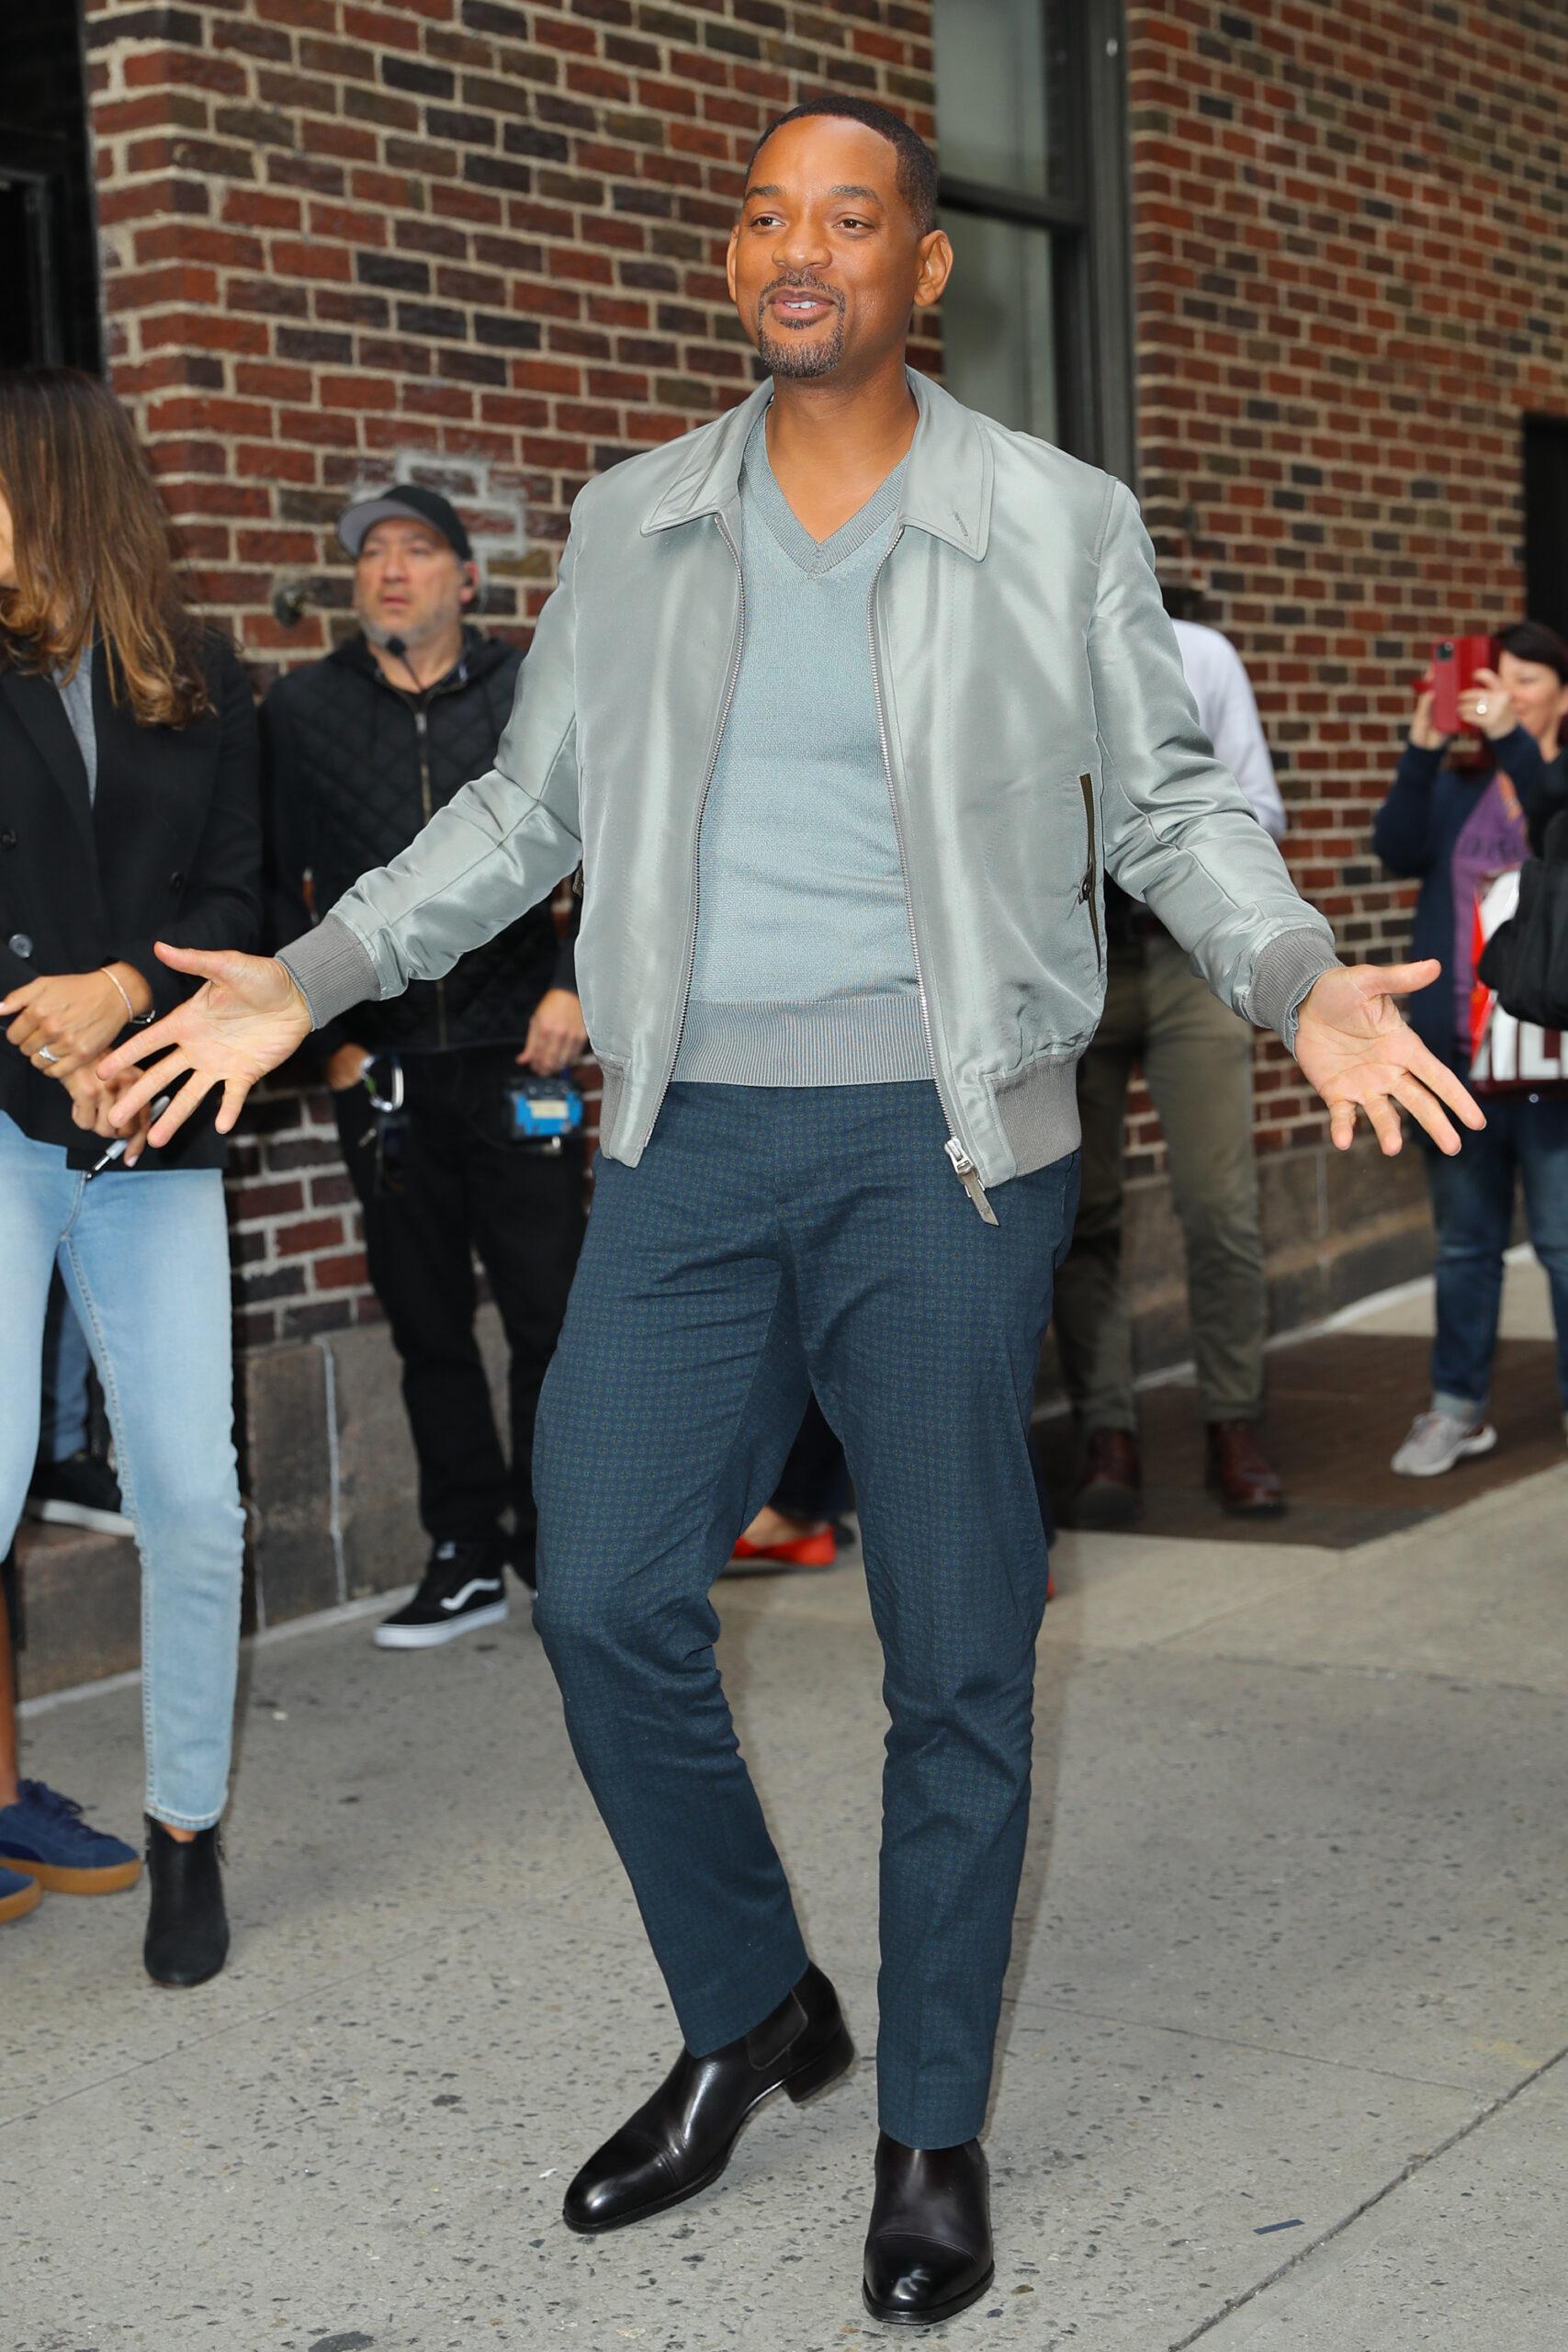 Will Smith was spotted posing for the cameras outside The Late Show with Stephen Colbert in NYC